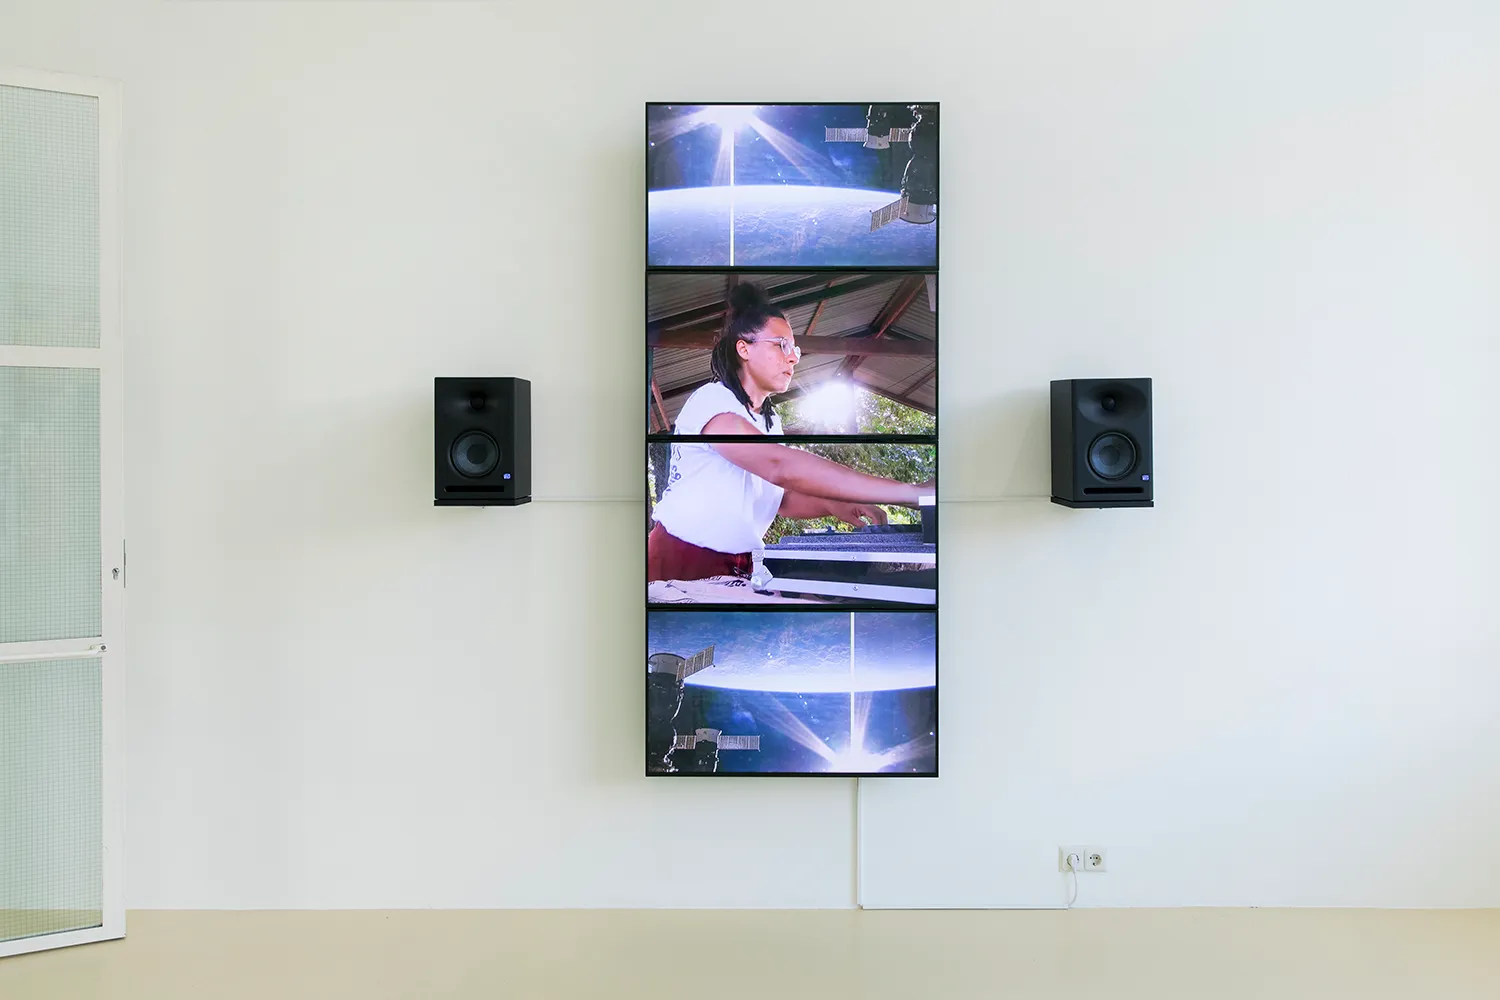 4 flat screens forming a vertical stripe on the wall with 2 speakers. A DJ is mixing in the middle of the screens, surrounded by satellite images of a planet